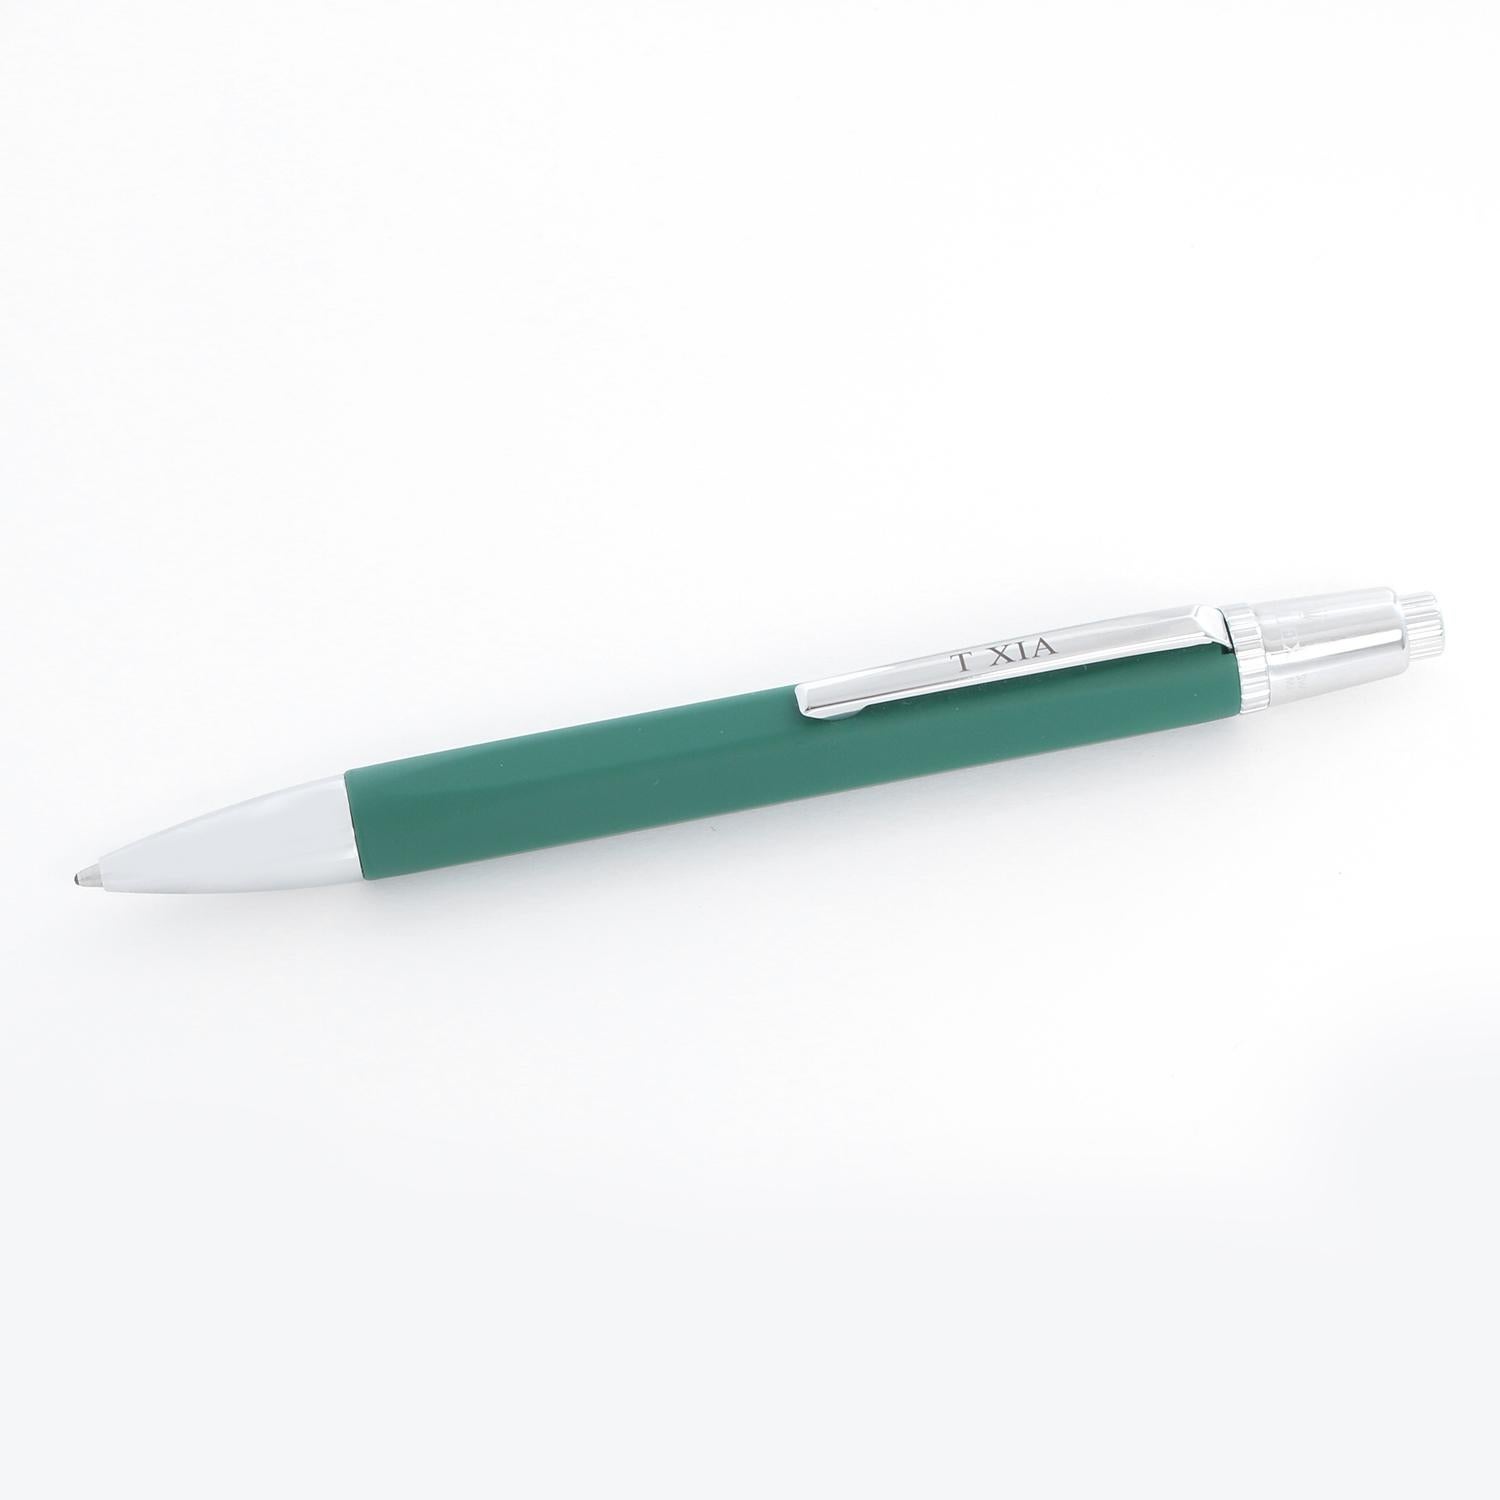 Rolex Ballpoint Push Pen - Green/ Silver Rolex pen with blue ink. Pre-owned with Rolex box. Measures 5.5 inches. Beautiful novelty gift.